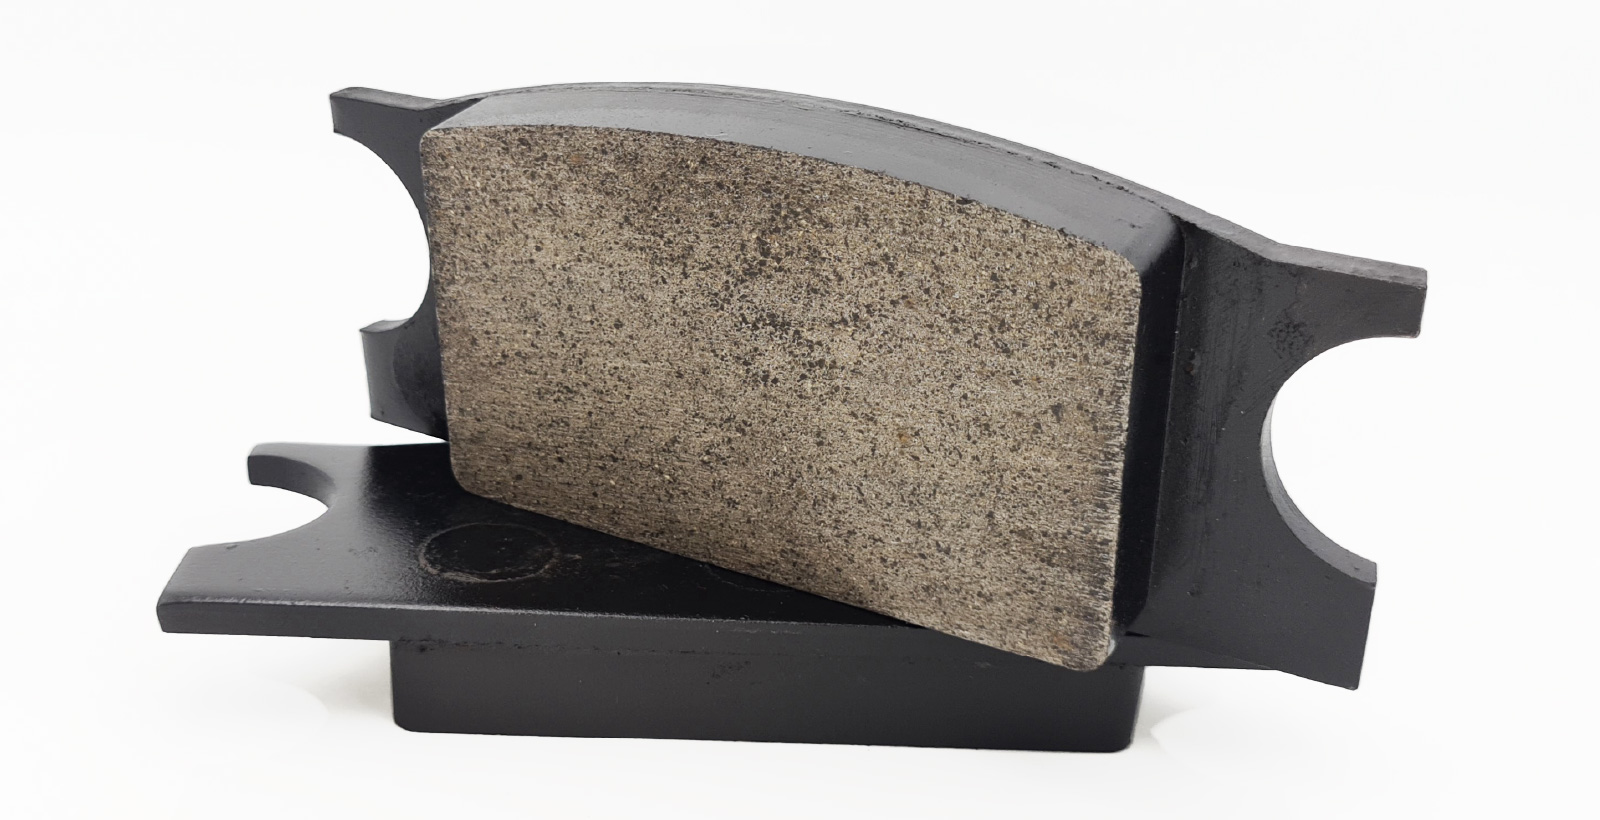 Commercial Brake Pads for Maritime Industry